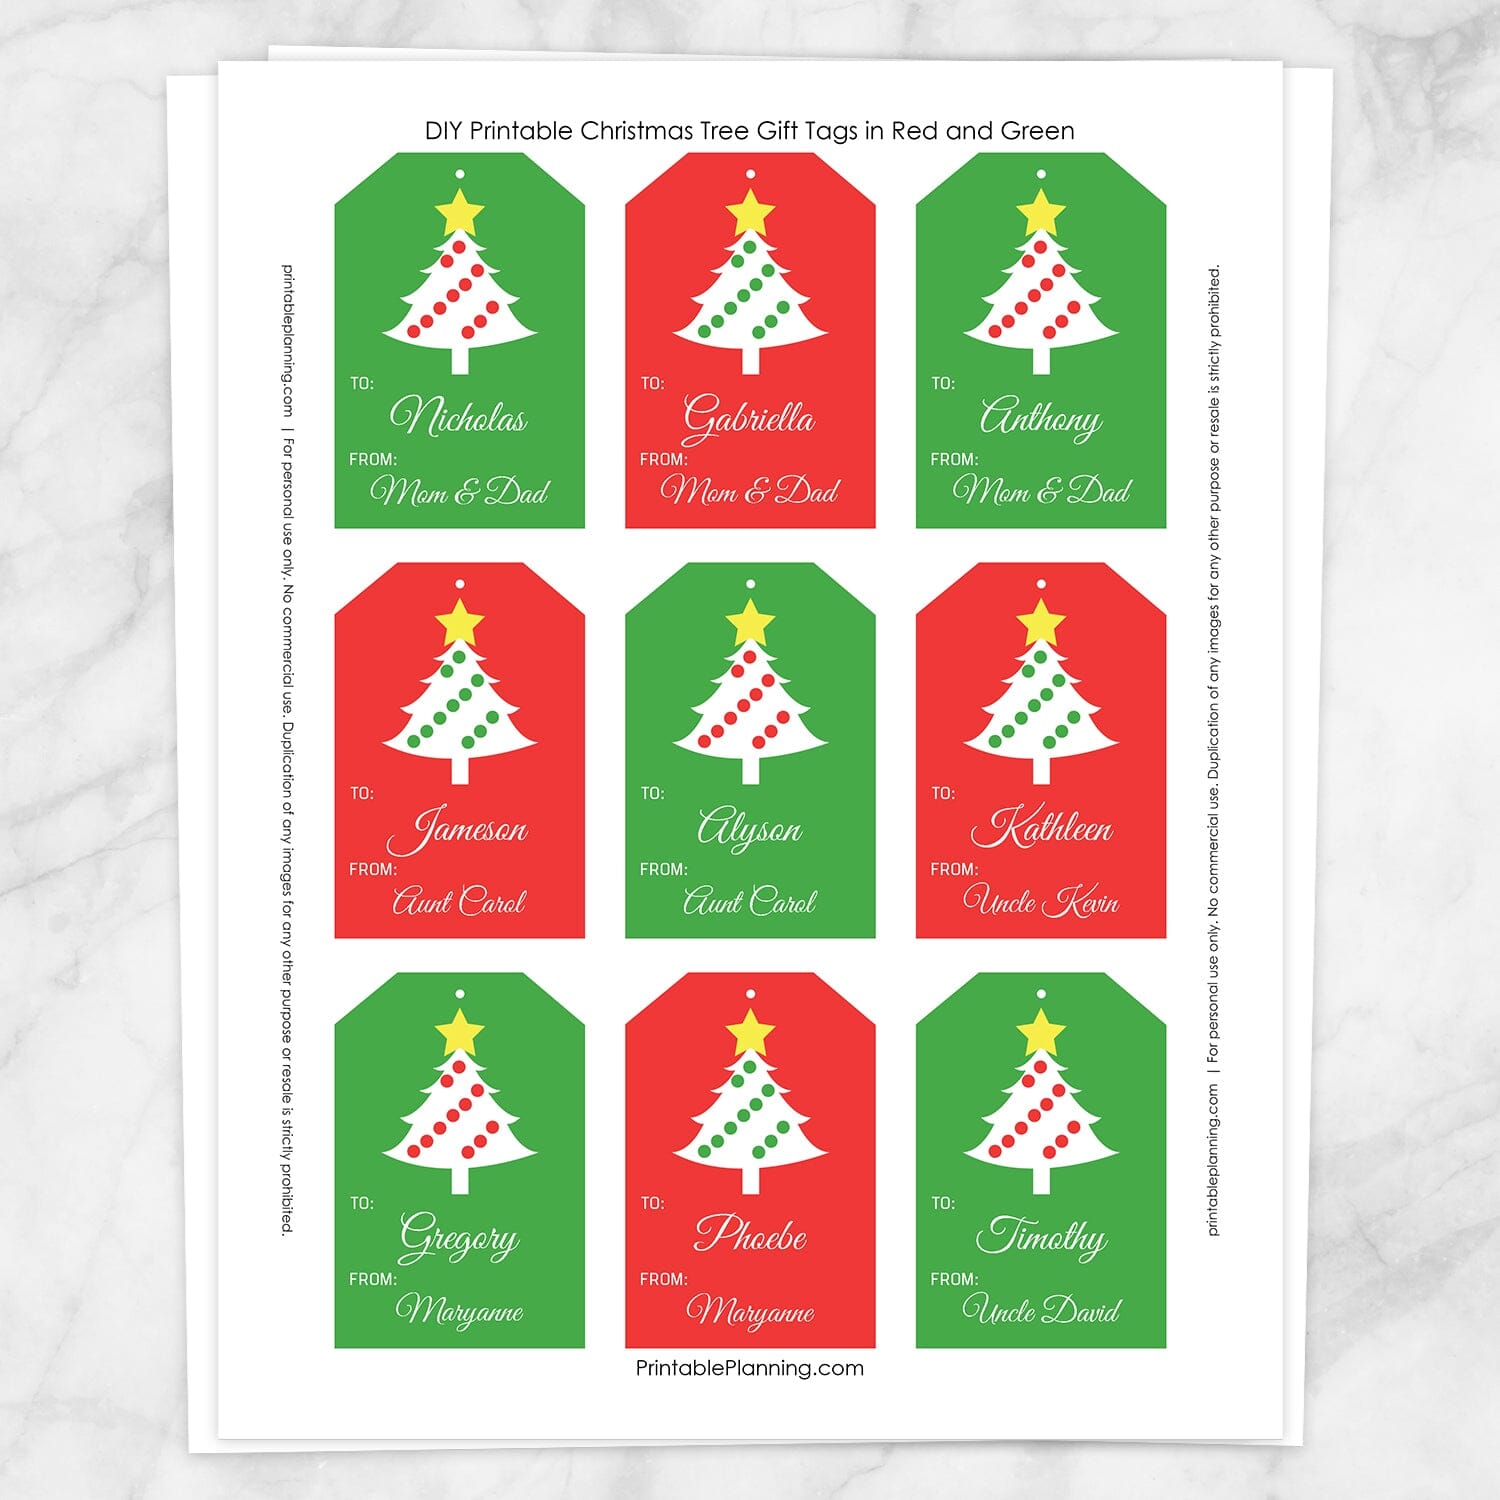 Printable Christmas Tree Red and Green Personalized Gift Tags at Printable Planning. Sheet of 9 gift tags.